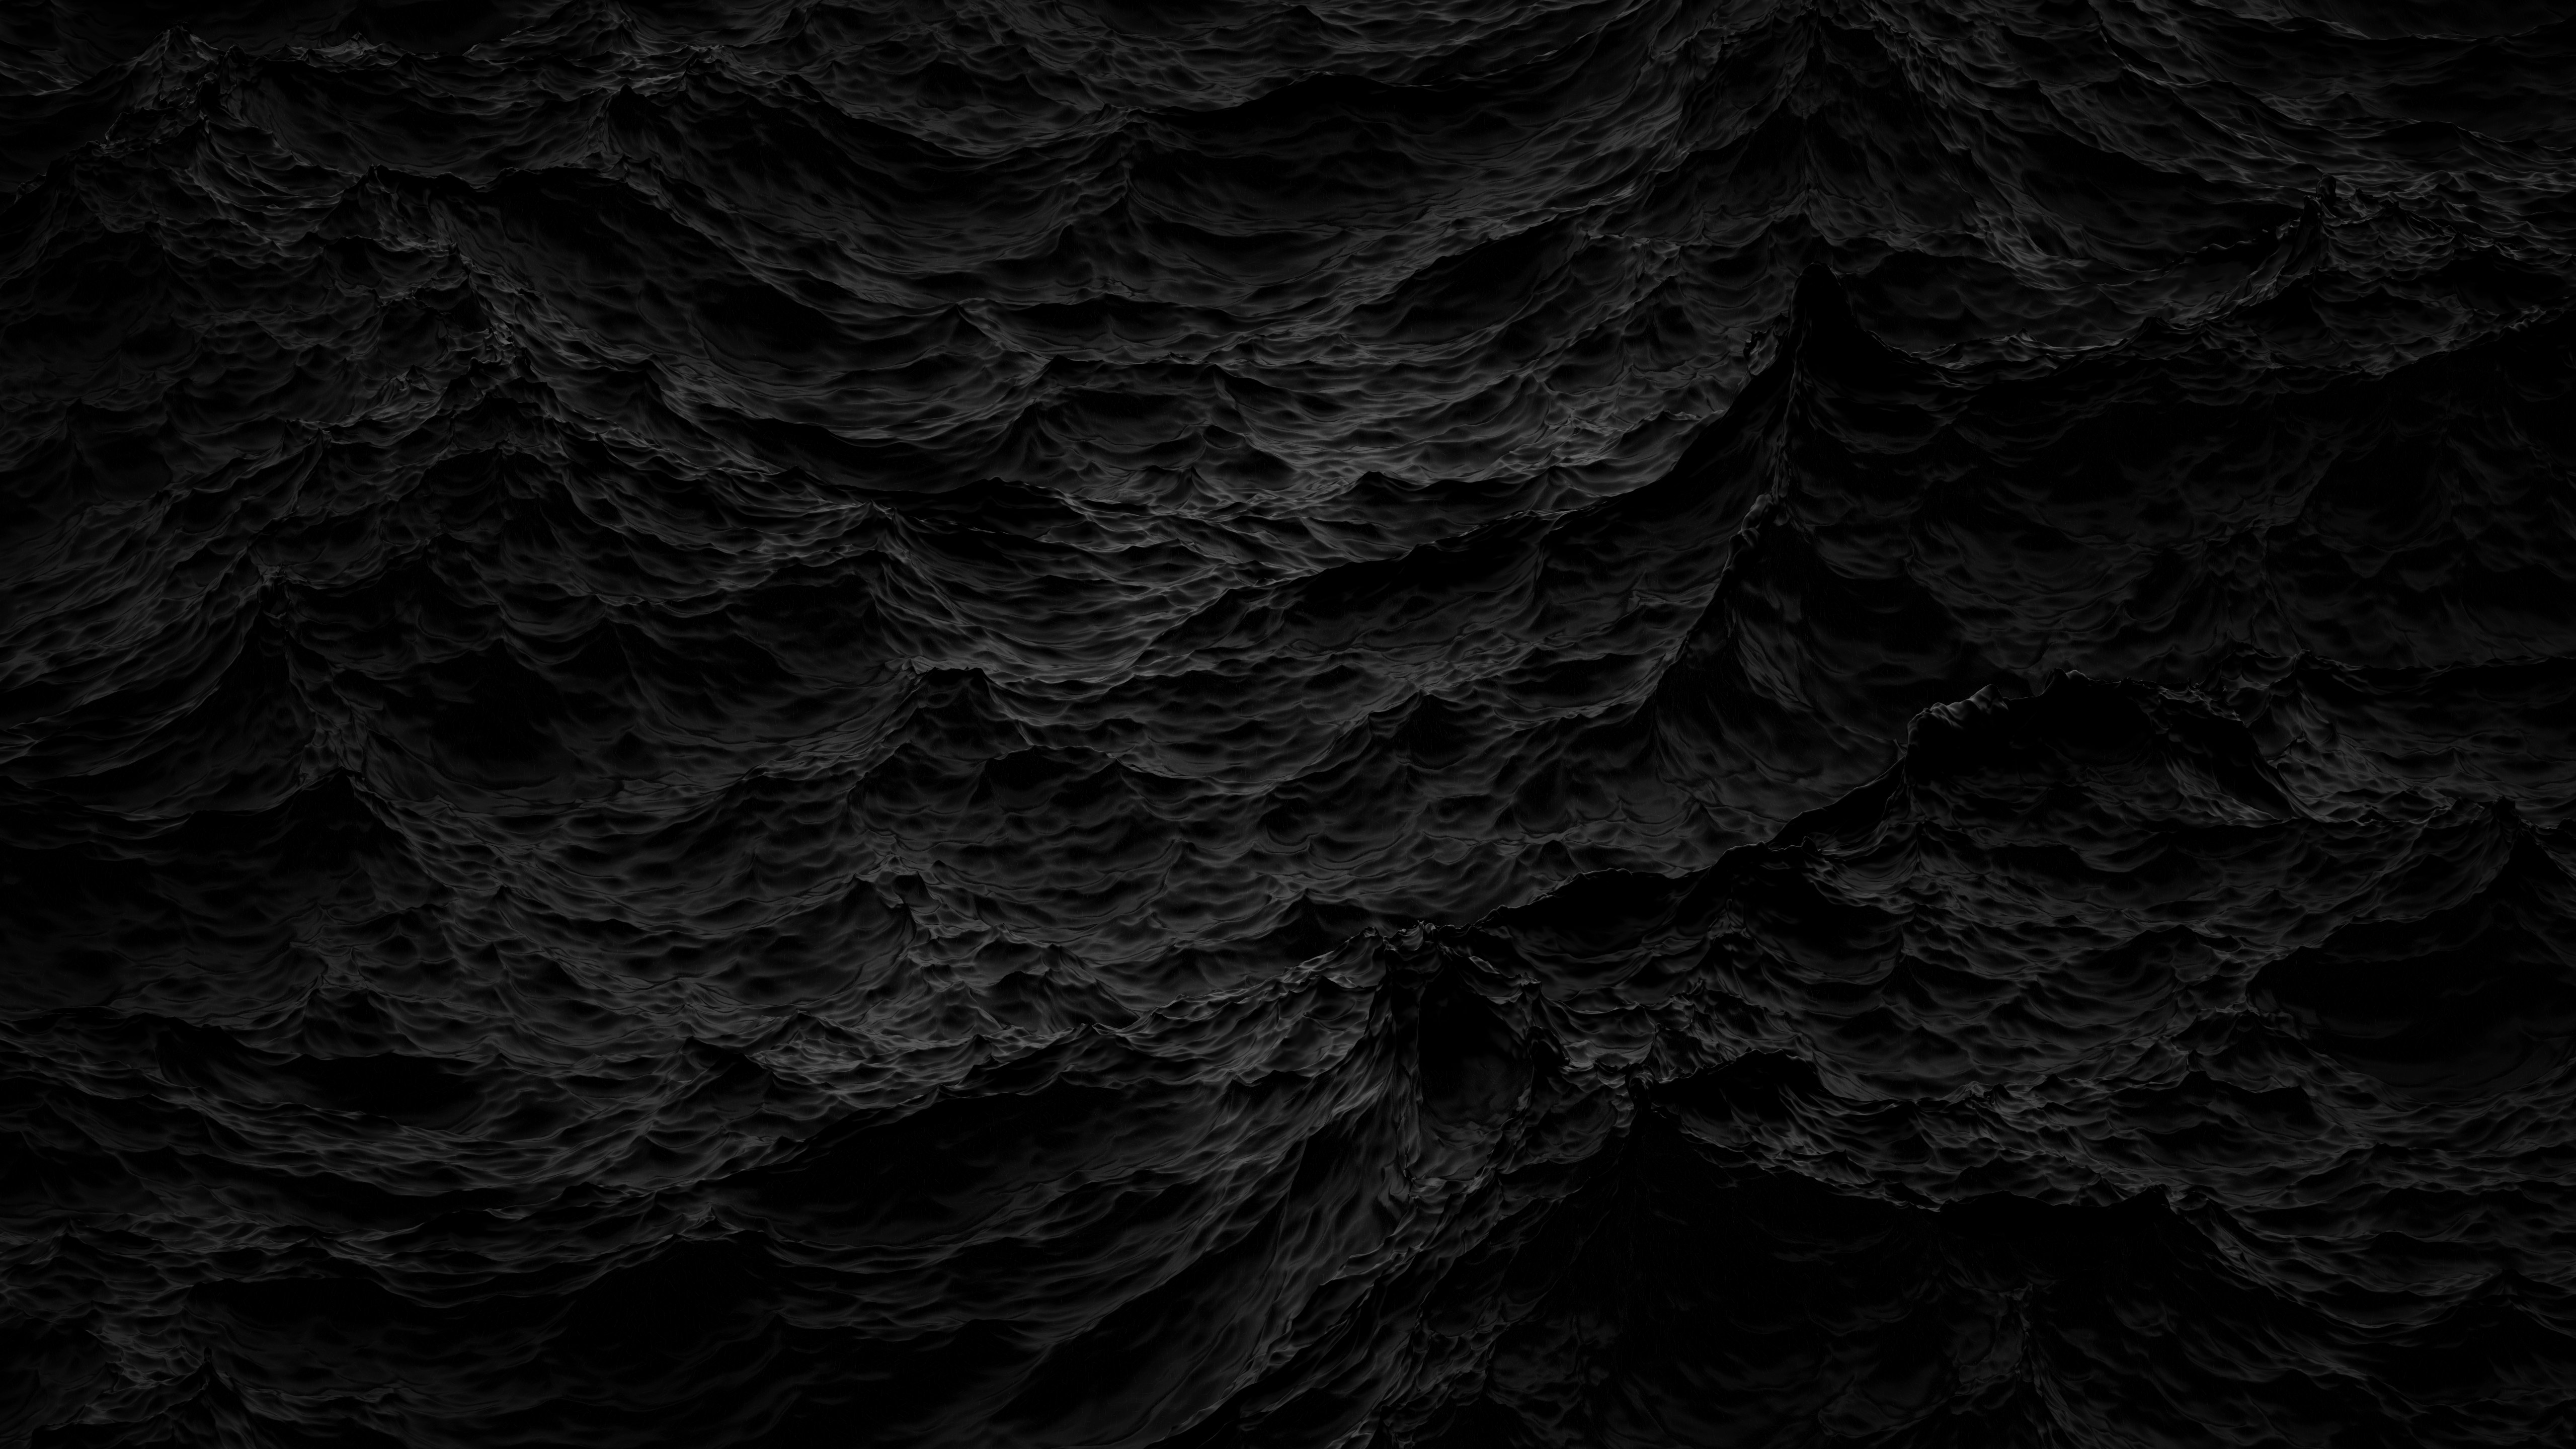 Black 4k Wallpapers For Your Desktop Or Mobile Screen Free And Easy To Download,Hanging Curtains Higher